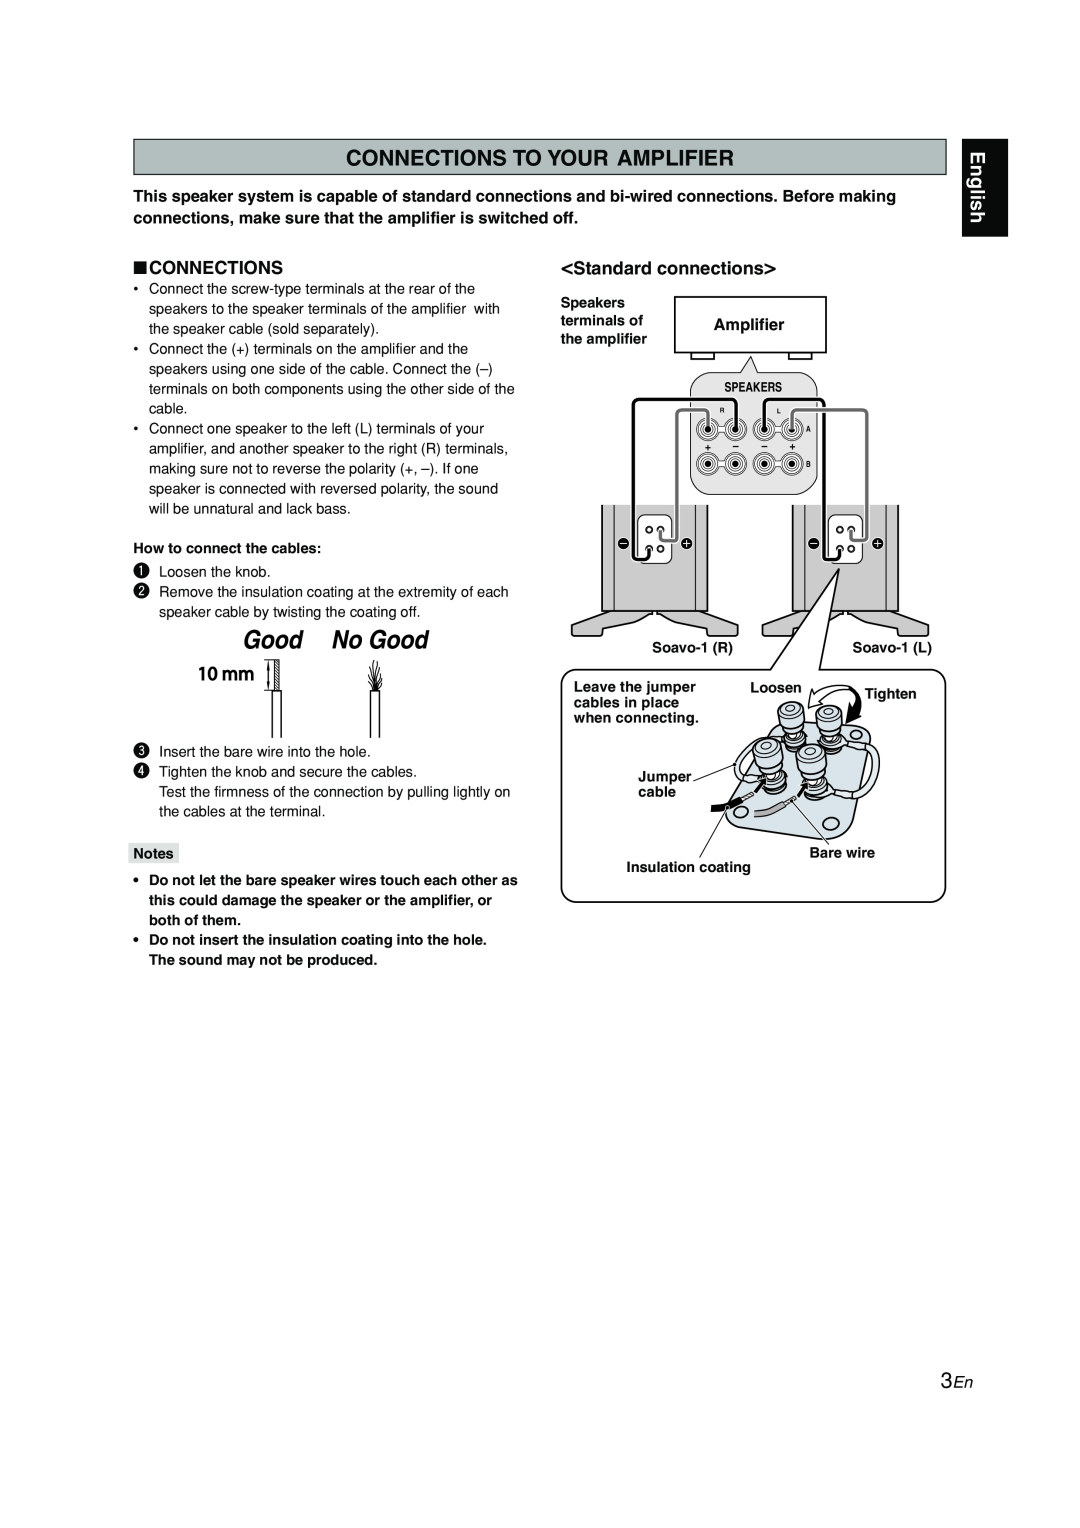 Yamaha Soavo-1 owner manual Connections To Your Amplifier, English, Standard connections 